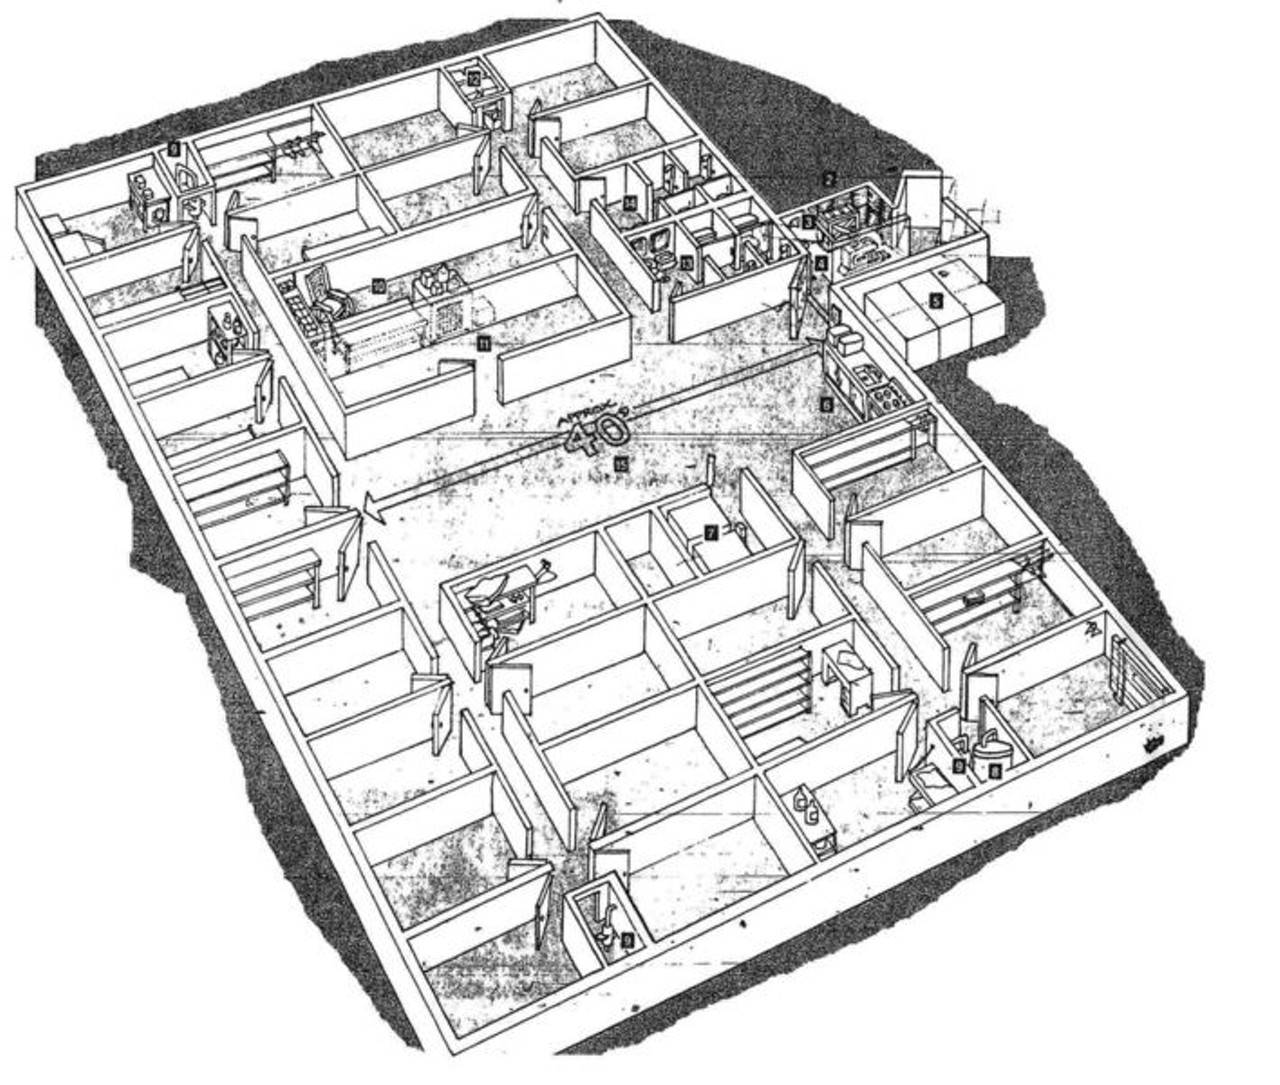 An overhead view of the Catacombs' layout.